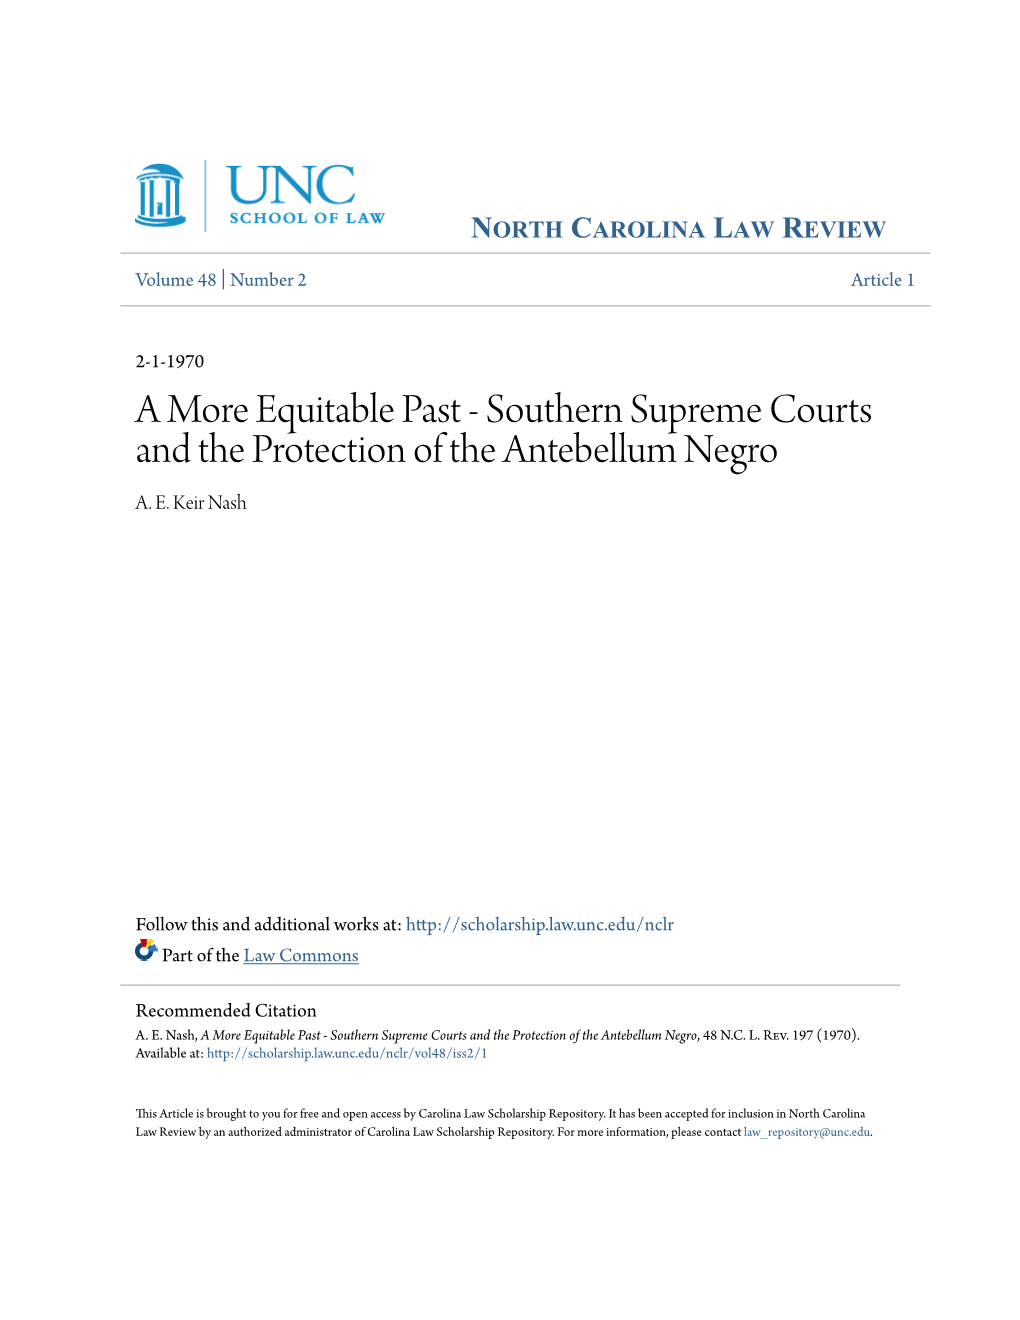 Southern Supreme Courts and the Protection of the Antebellum Negro A